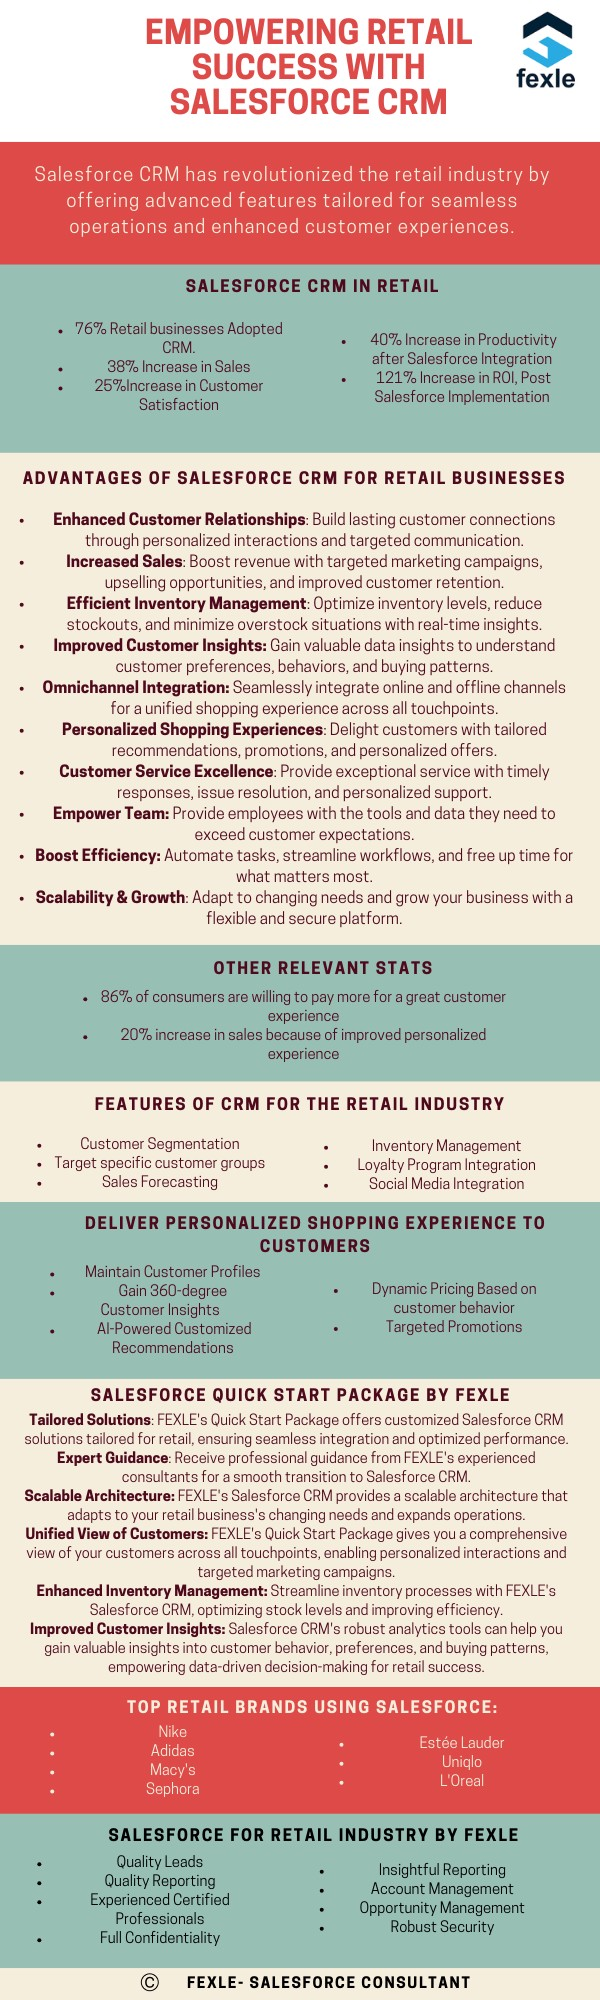 Benefits of CRM for the Retail Industries